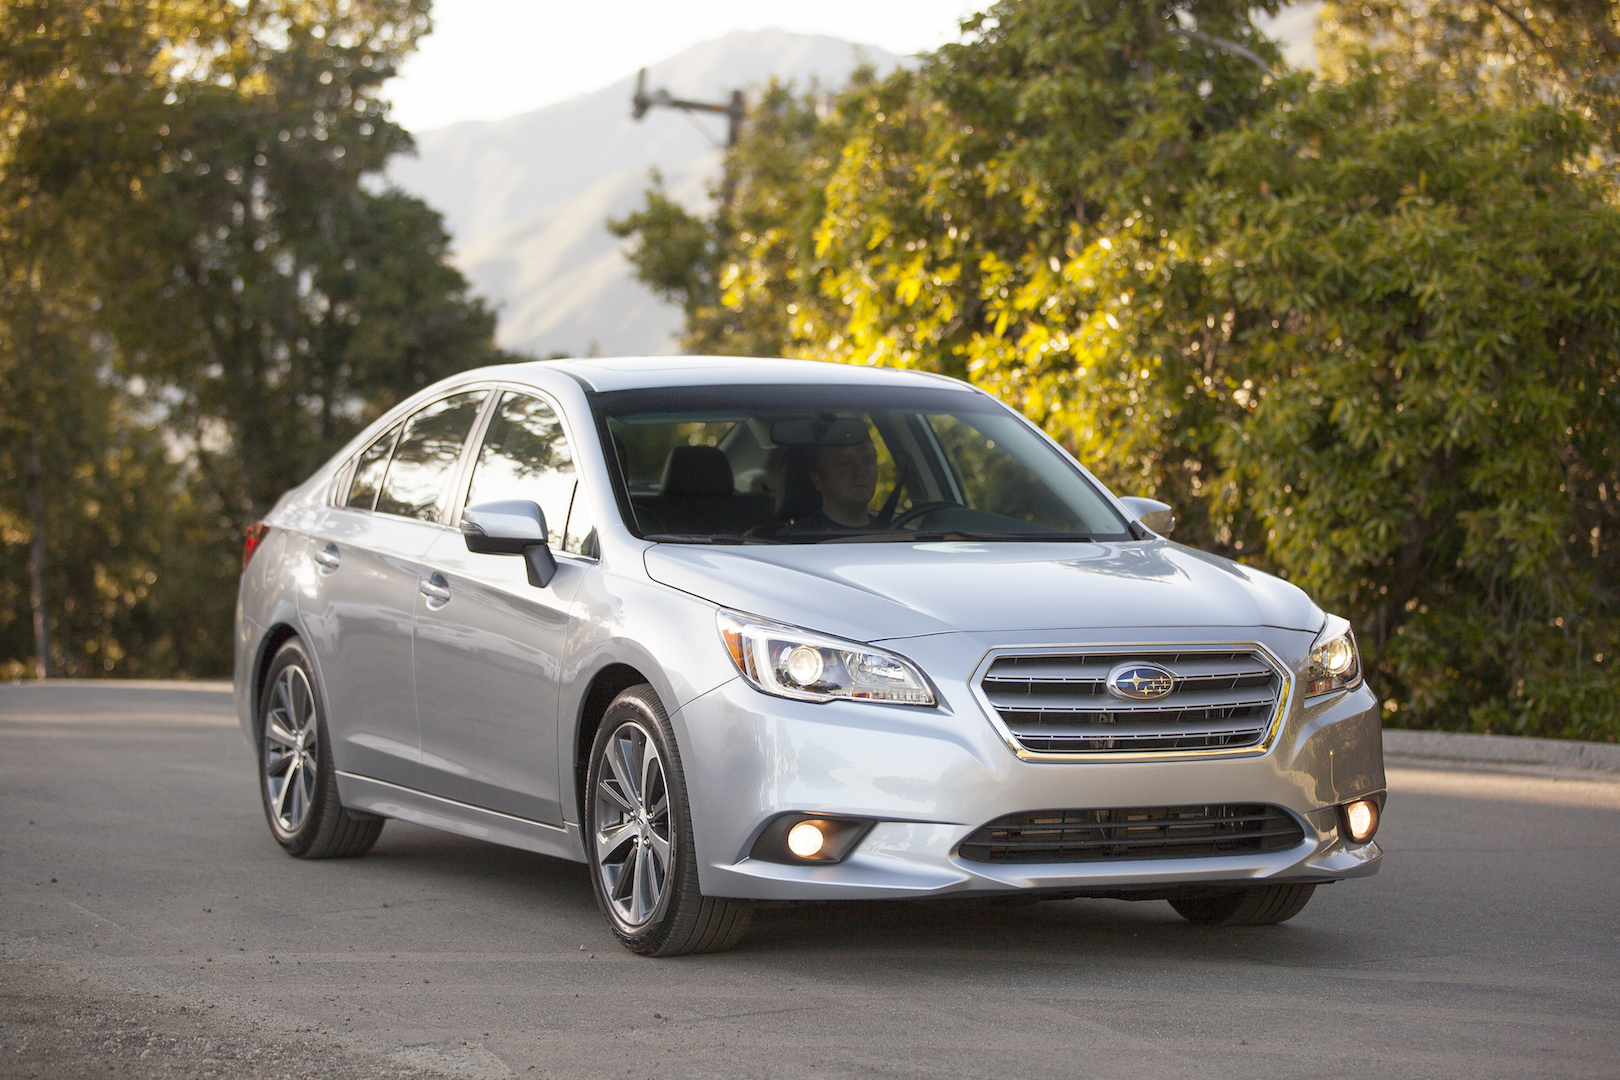 2015 Subaru Legacy Review, Ratings, Specs, Prices, and Photos - The Car